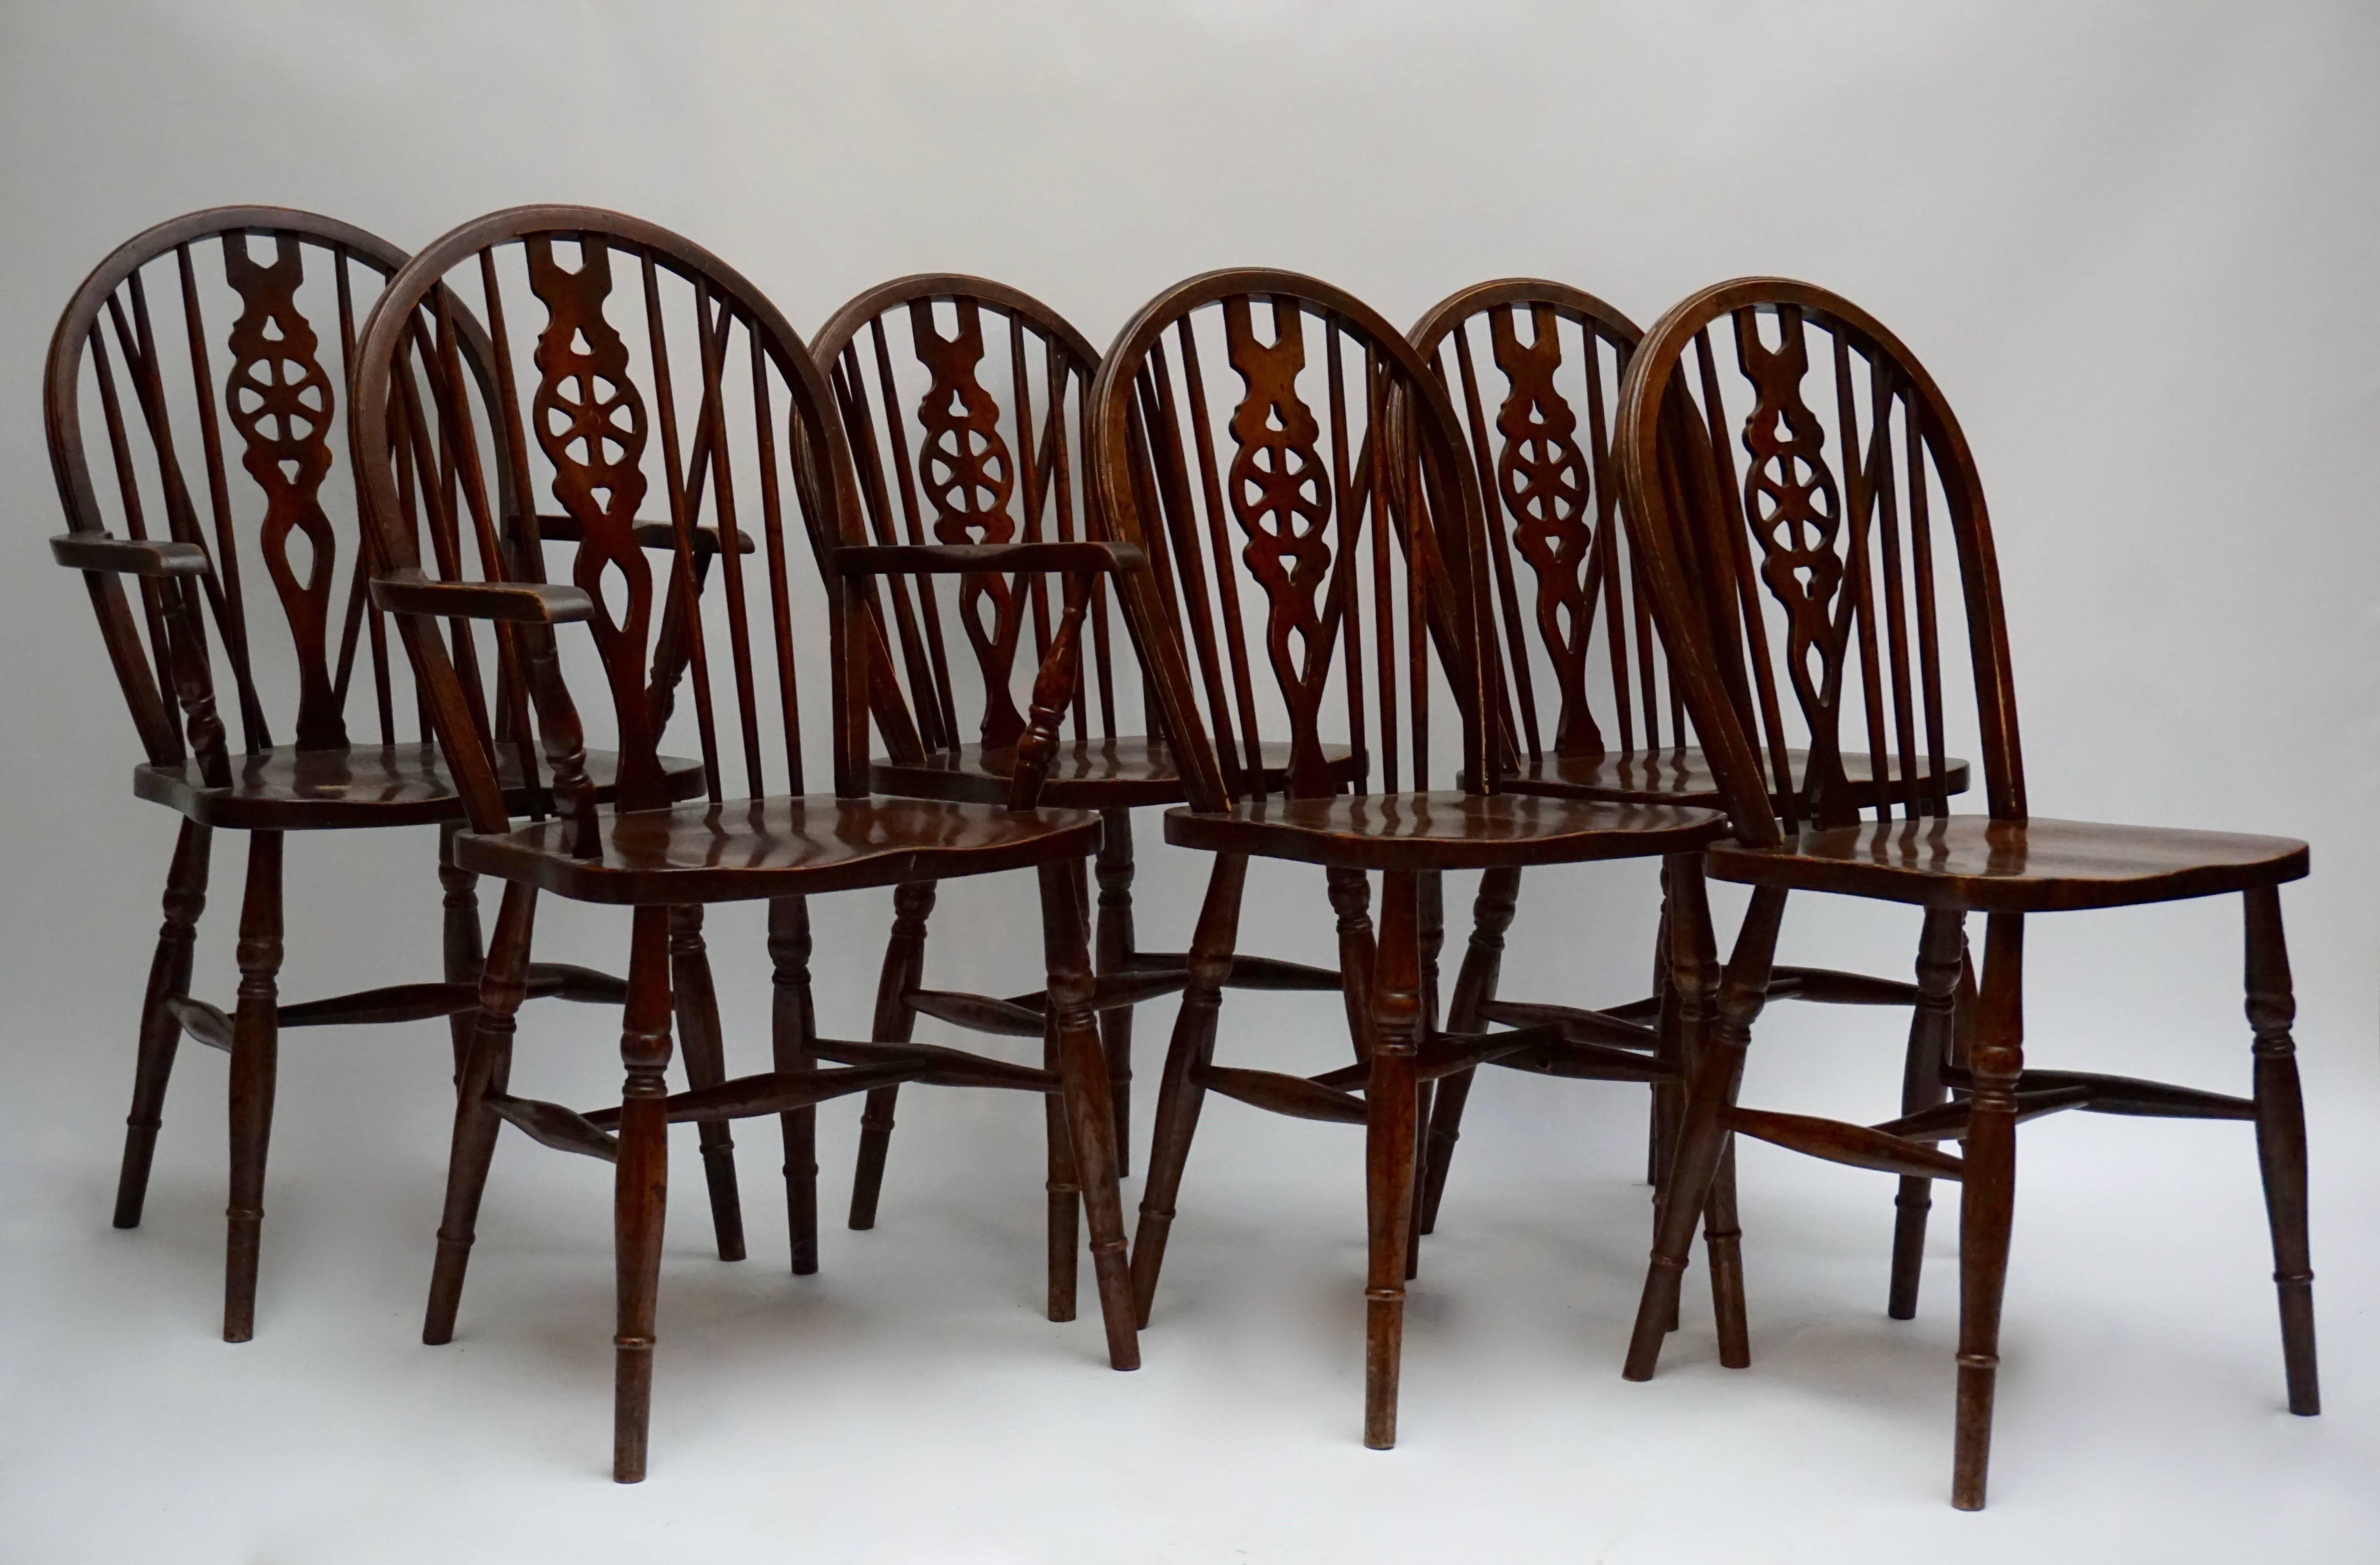 Six unusual and wonderful aged, worn patina chairs are in good condition.They look fantastic together as a set.
The seat height of all seats is 18.5 in. (47 cm)
The height of the armrest is 26.77 in. (68 cm)
The two high back chairs are 37.79 in.